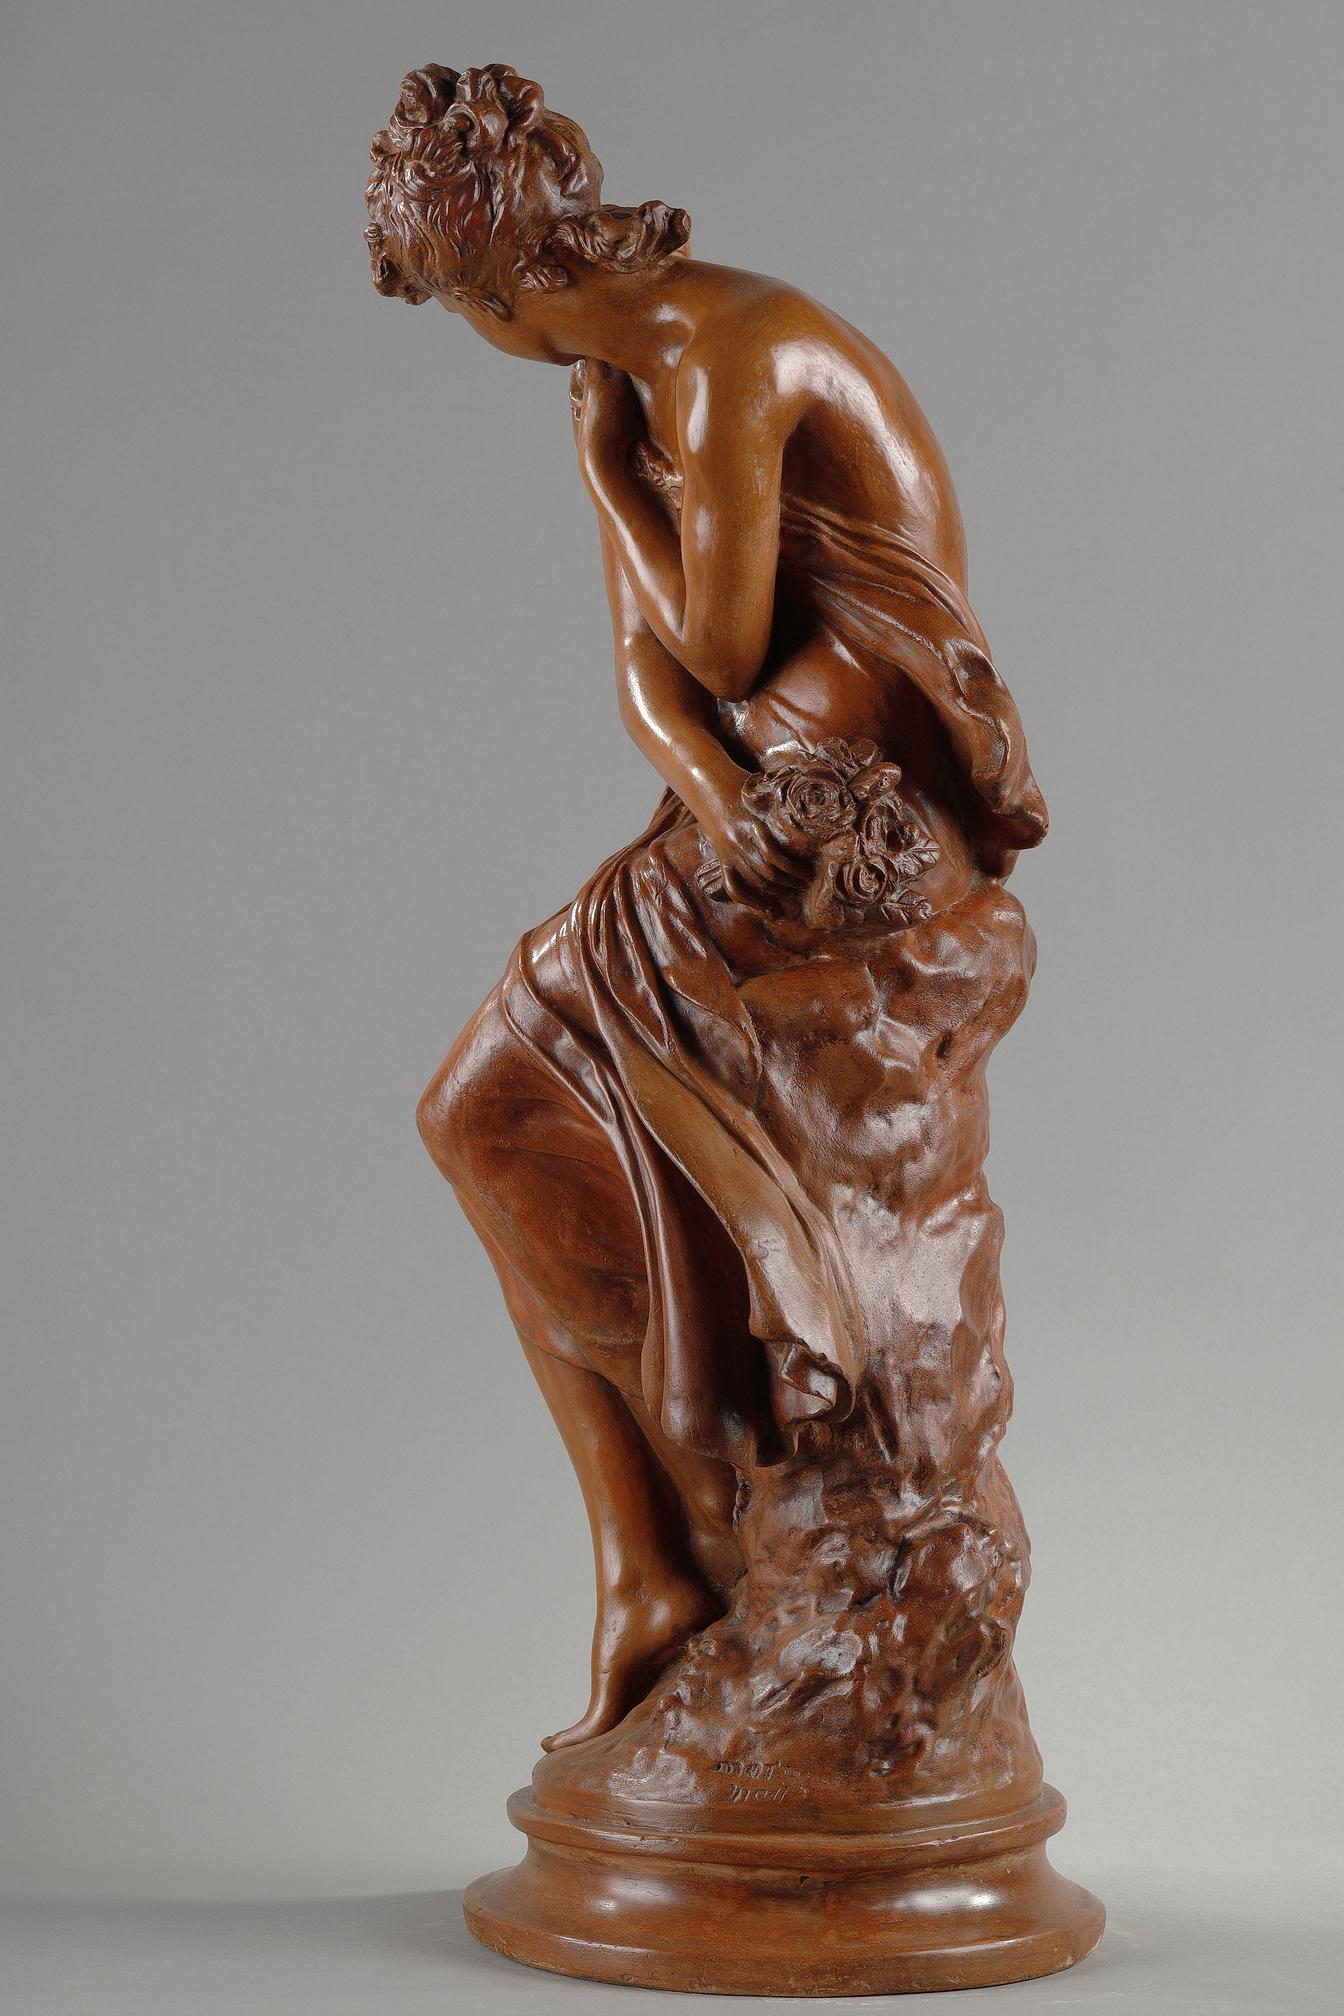 Patinated terracotta sculpture signed by Mathurin Moreau 2